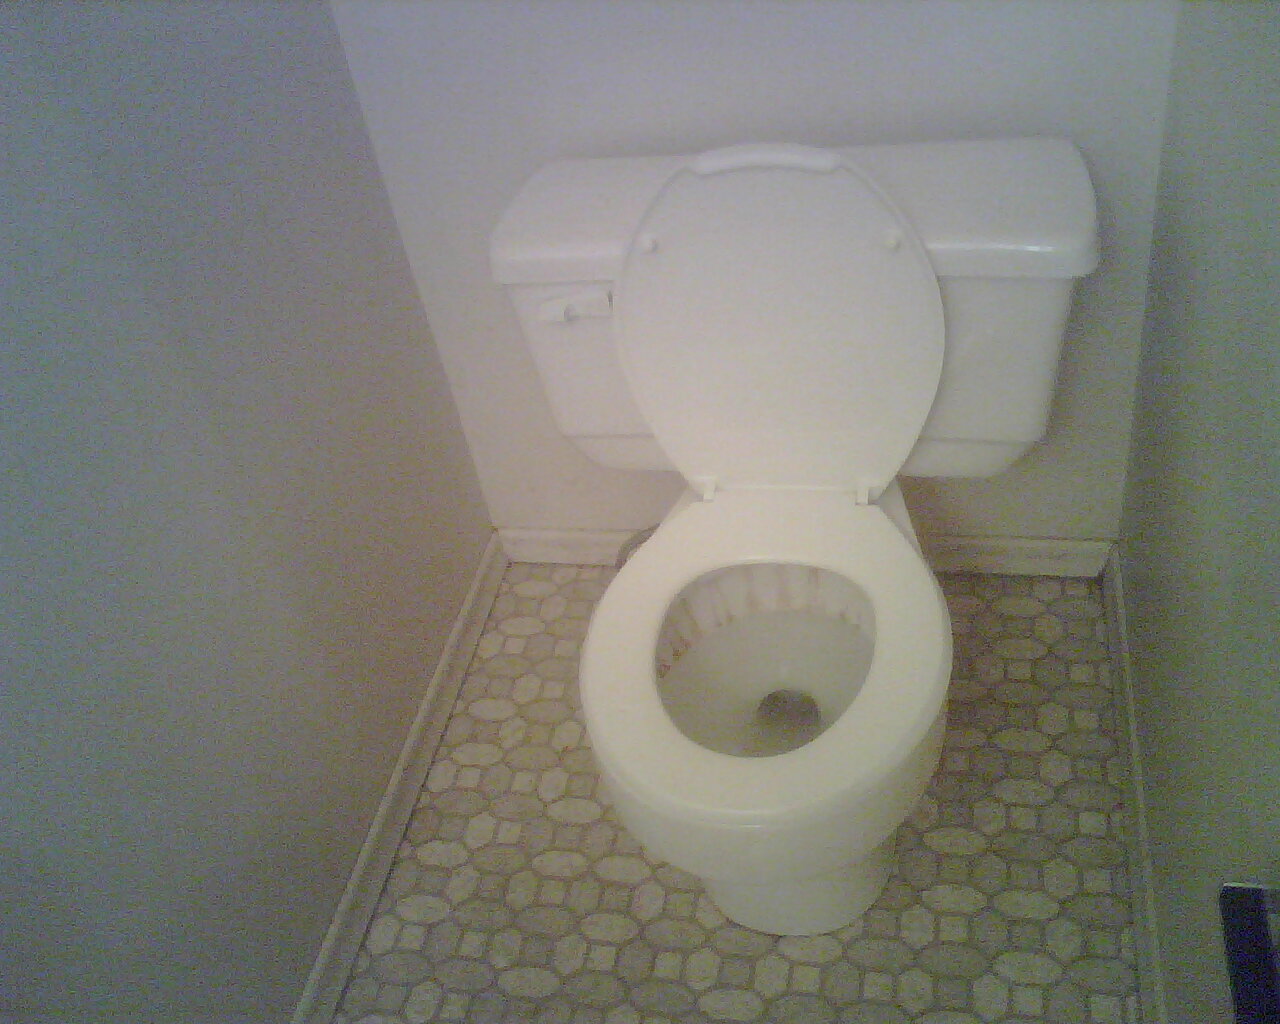 Downstairs (1st Floor) bathroom's toilet (1 of only 2 in the whole house) [will need to be cleaned by landlord before move-in]